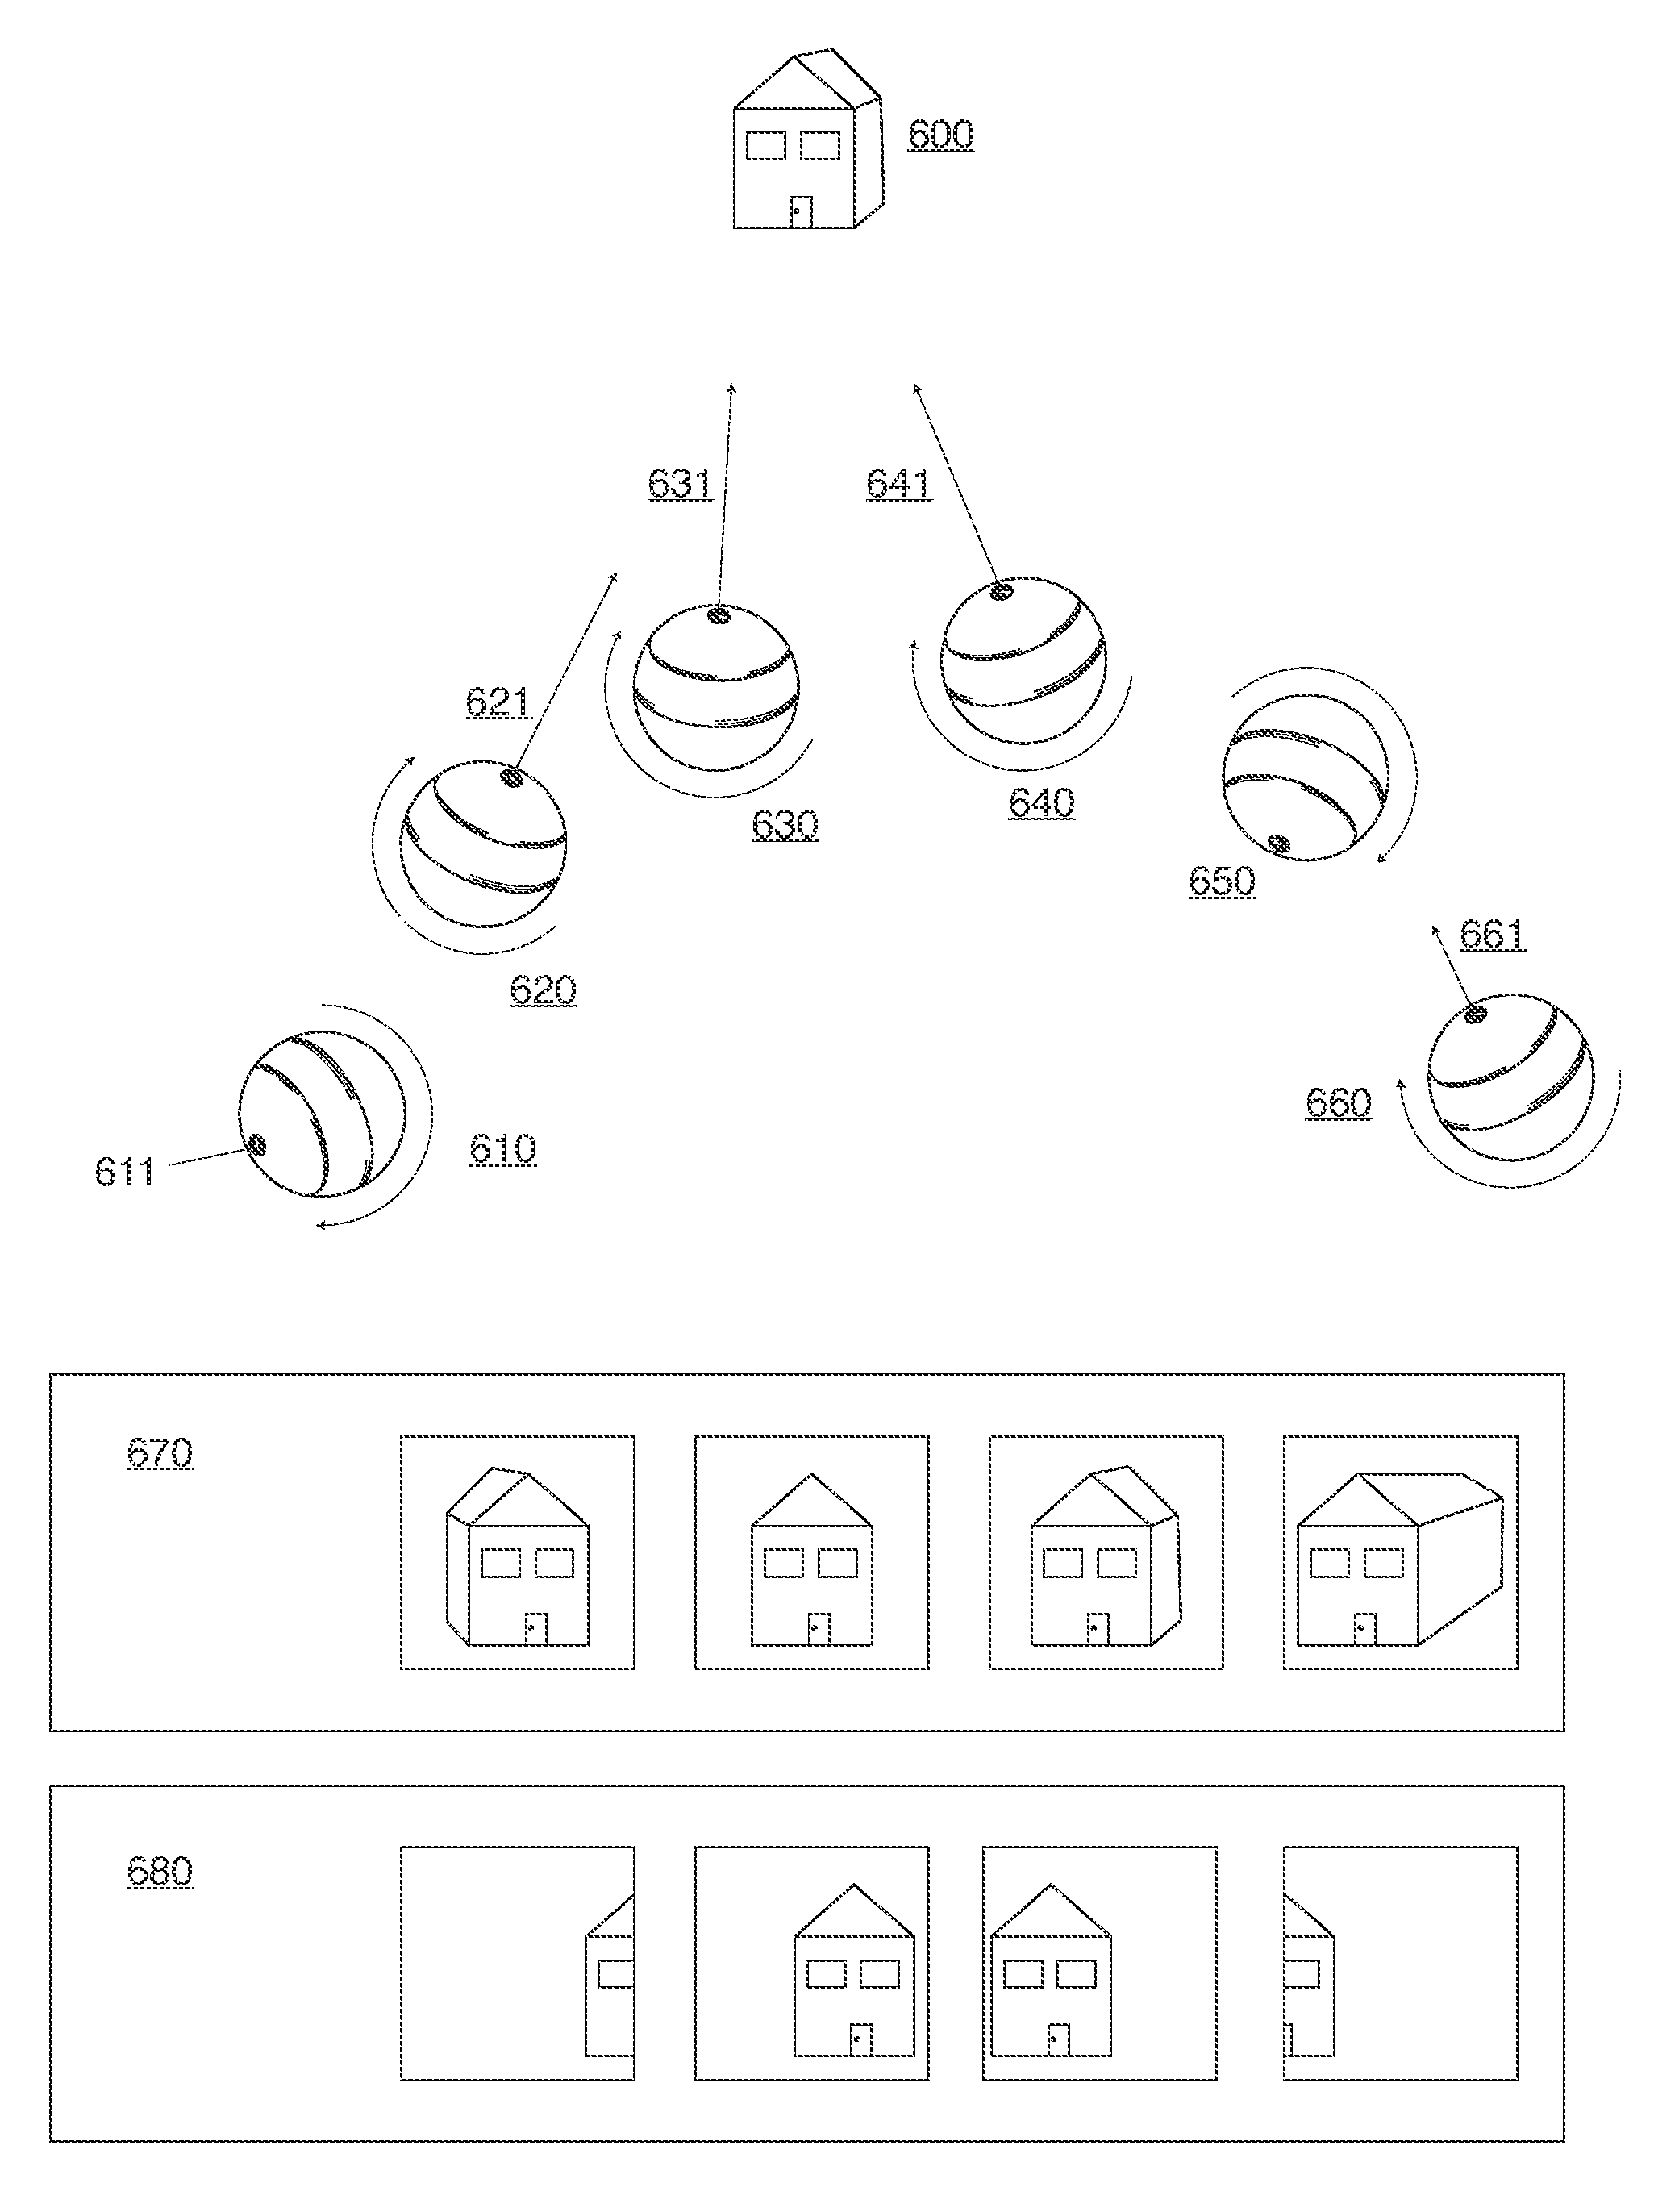 Ball with camera for reconnaissance or recreation and network for operating the same